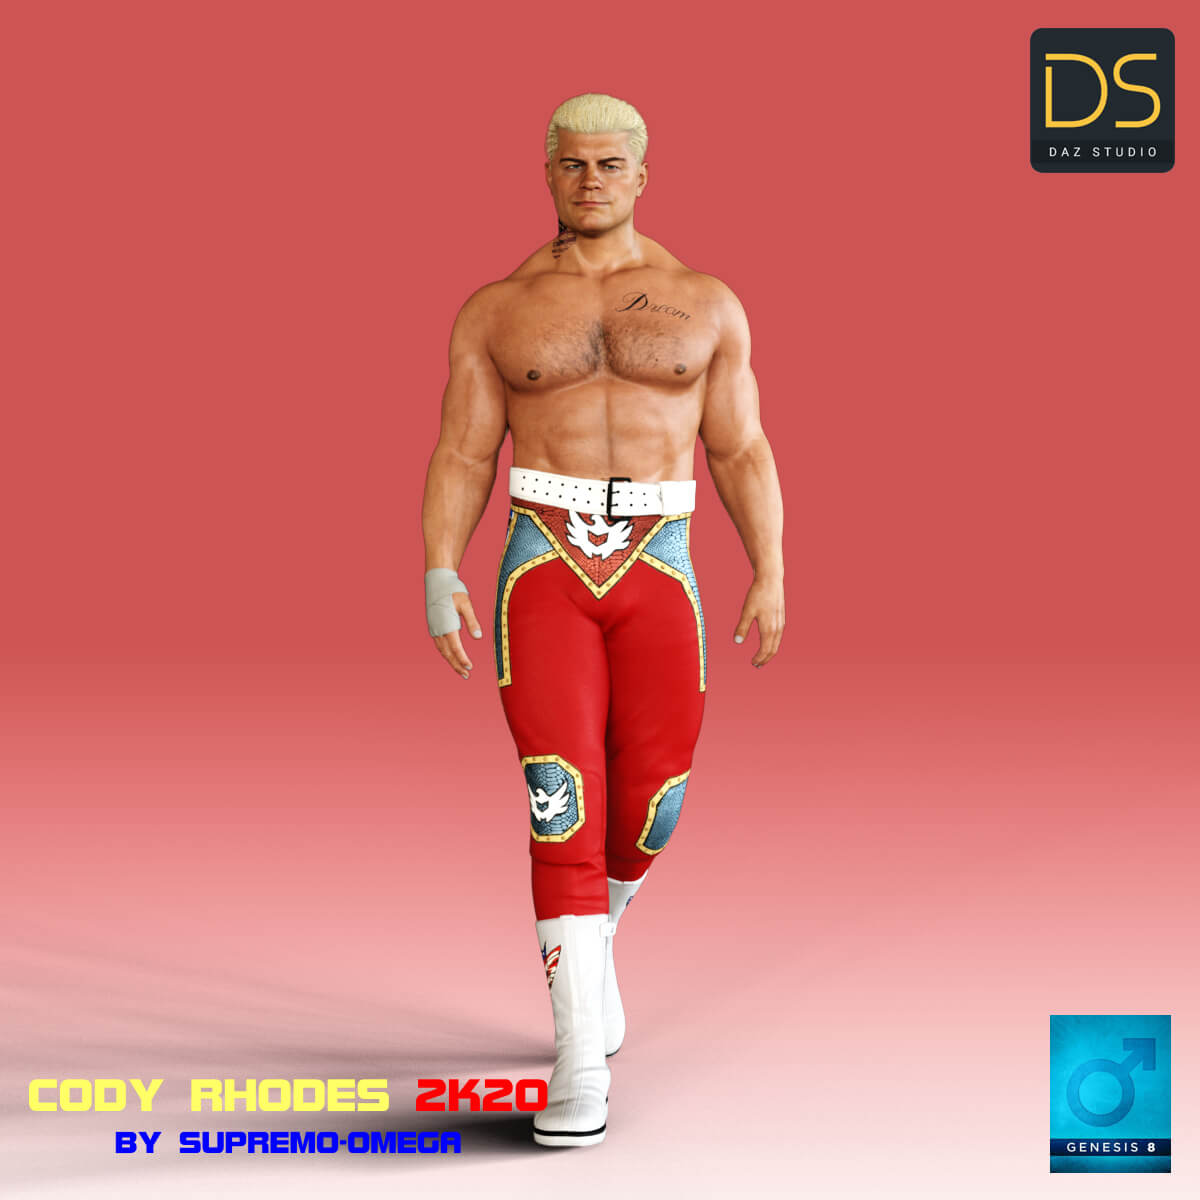 cody rhodes 2k23 for g8 male 011177ce046a22122d